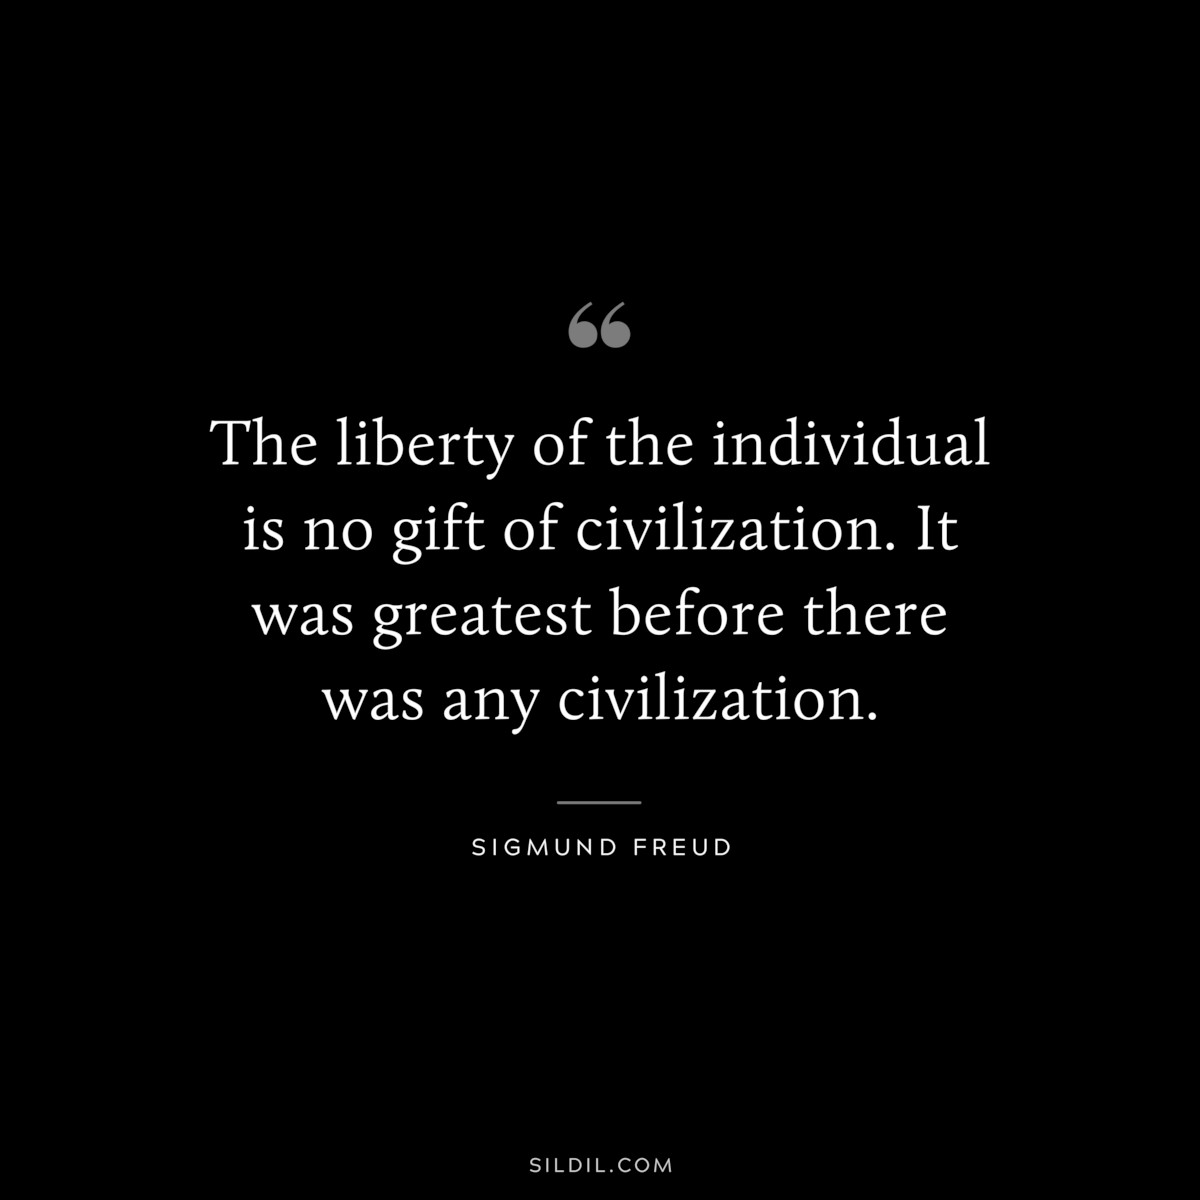 The liberty of the individual is no gift of civilization. It was greatest before there was any civilization. ― Sigmund Frued